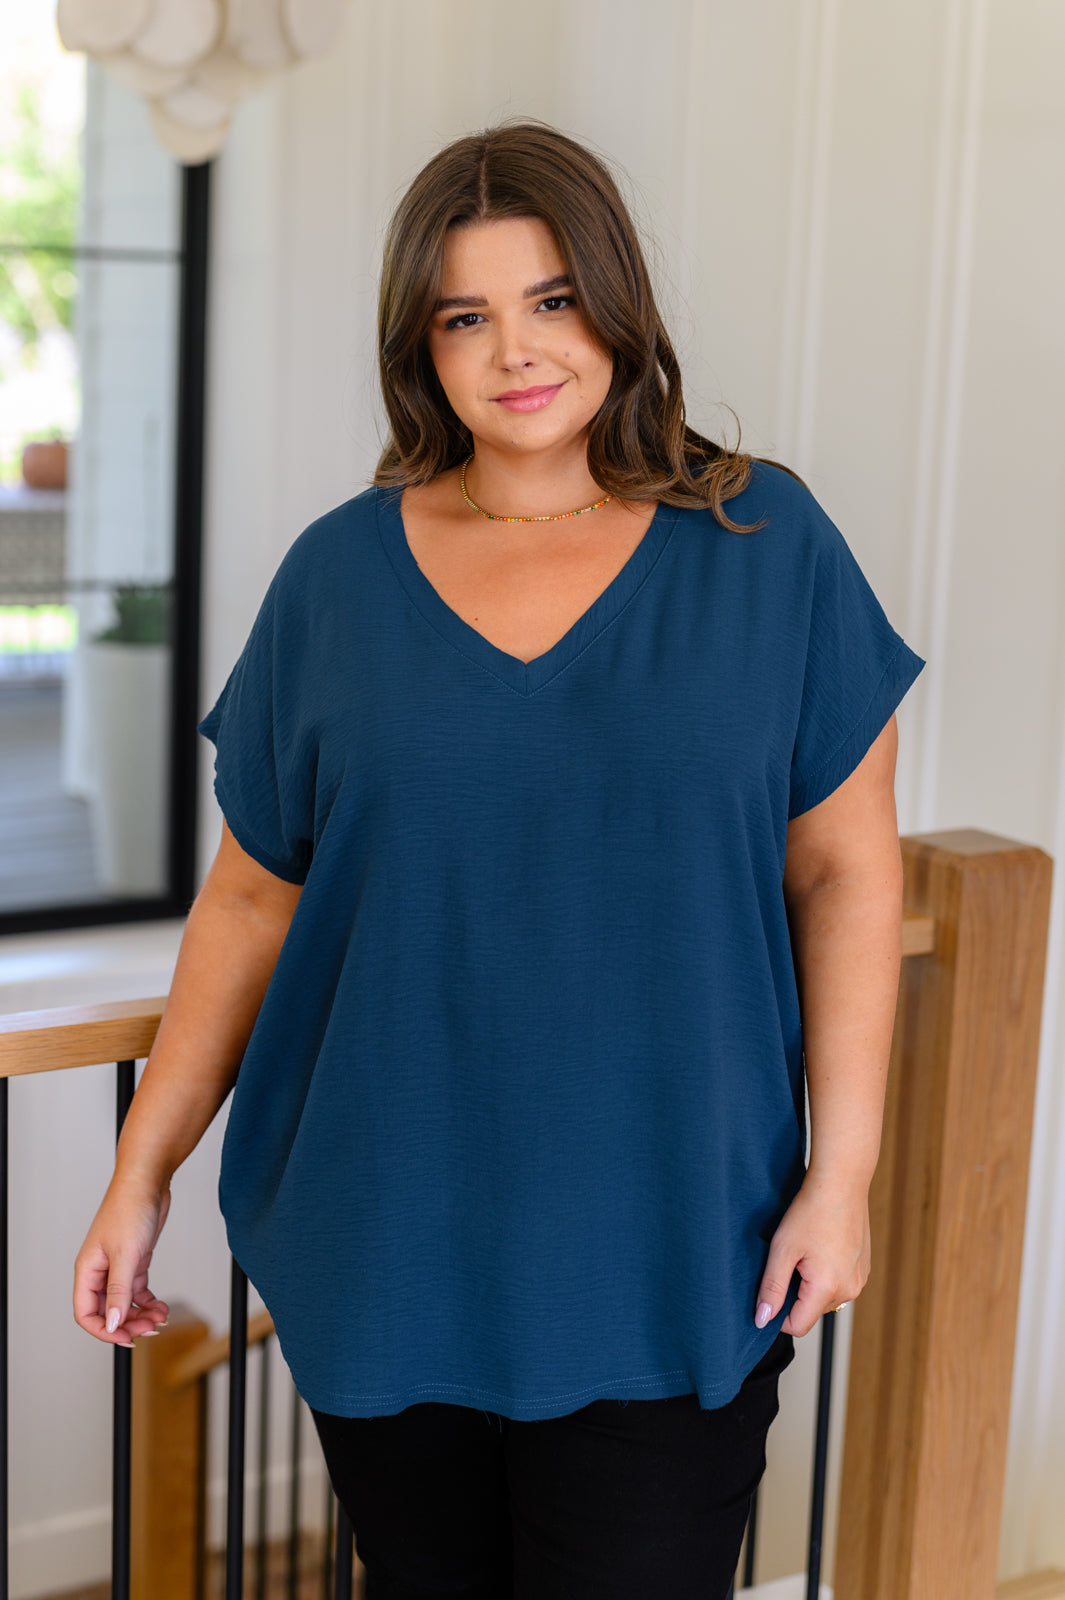 Very Much Needed V-Neck Top in Teal-Short Sleeve Tops-Krush Kandy, Women's Online Fashion Boutique Located in Phoenix, Arizona (Scottsdale Area)